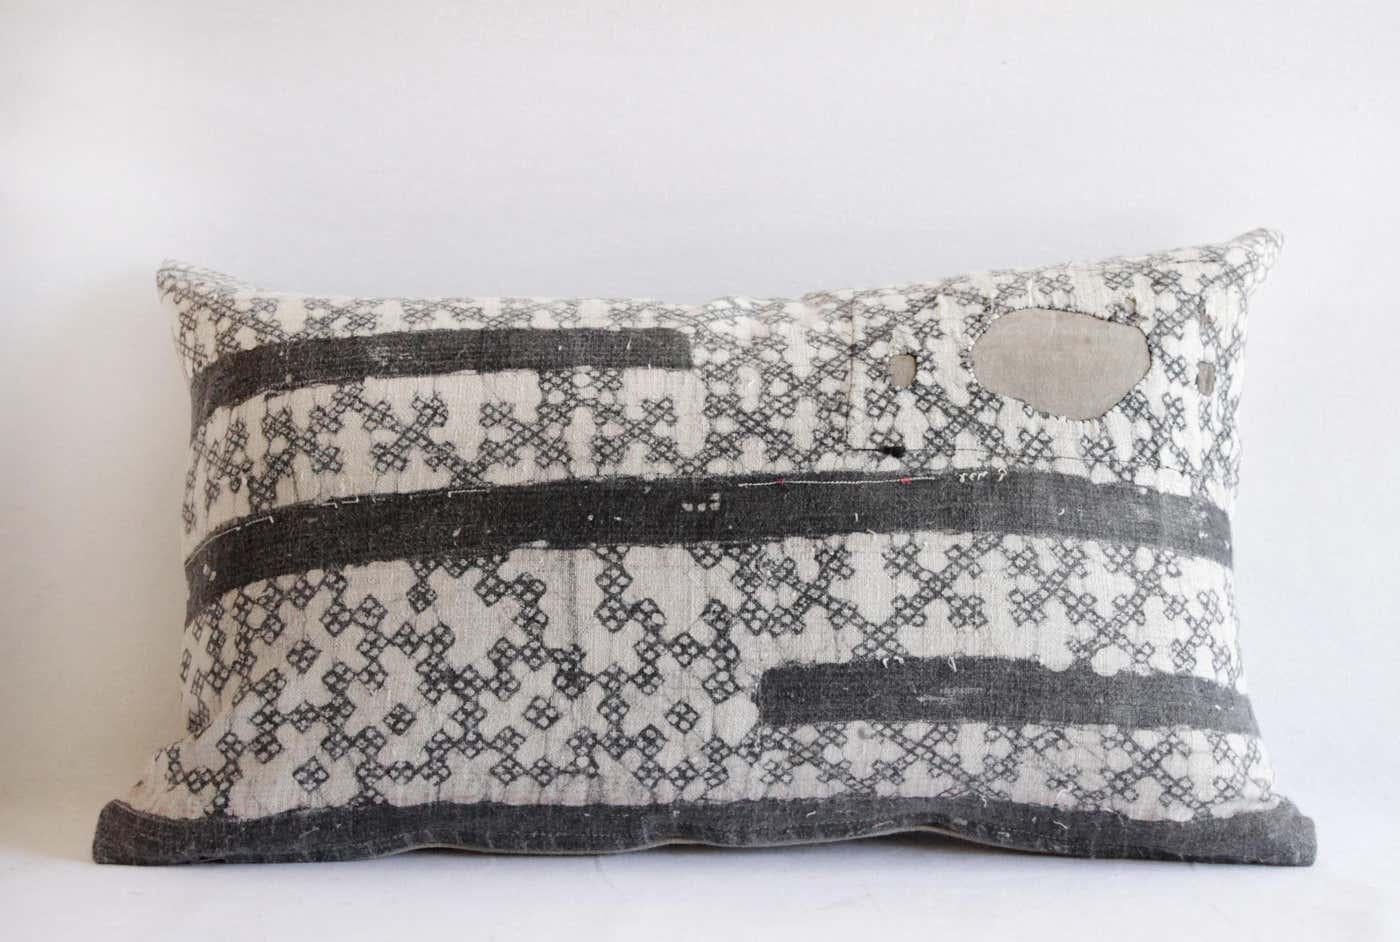 Vintage Batik accent pillow charcoal and natural linen 
This is a beautiful vintage textile piece we have created into a pillow. The front side is a linen weave, light natural color background with a darker charcoal grey (faded black) batik pattern.